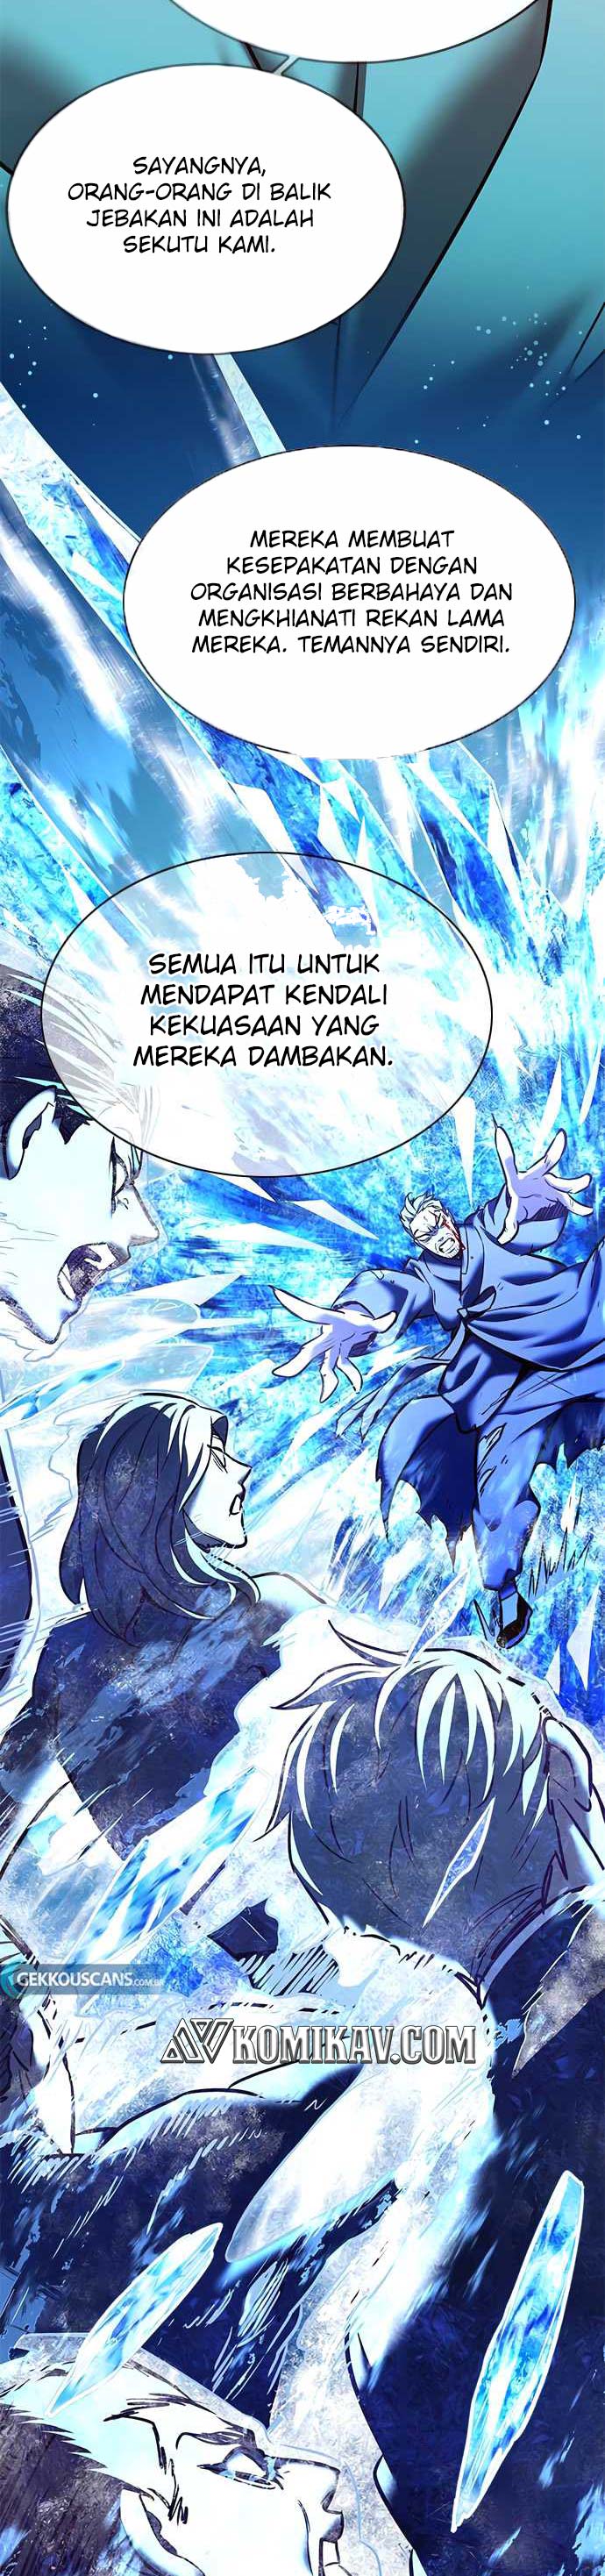 Eleceed Chapter 226